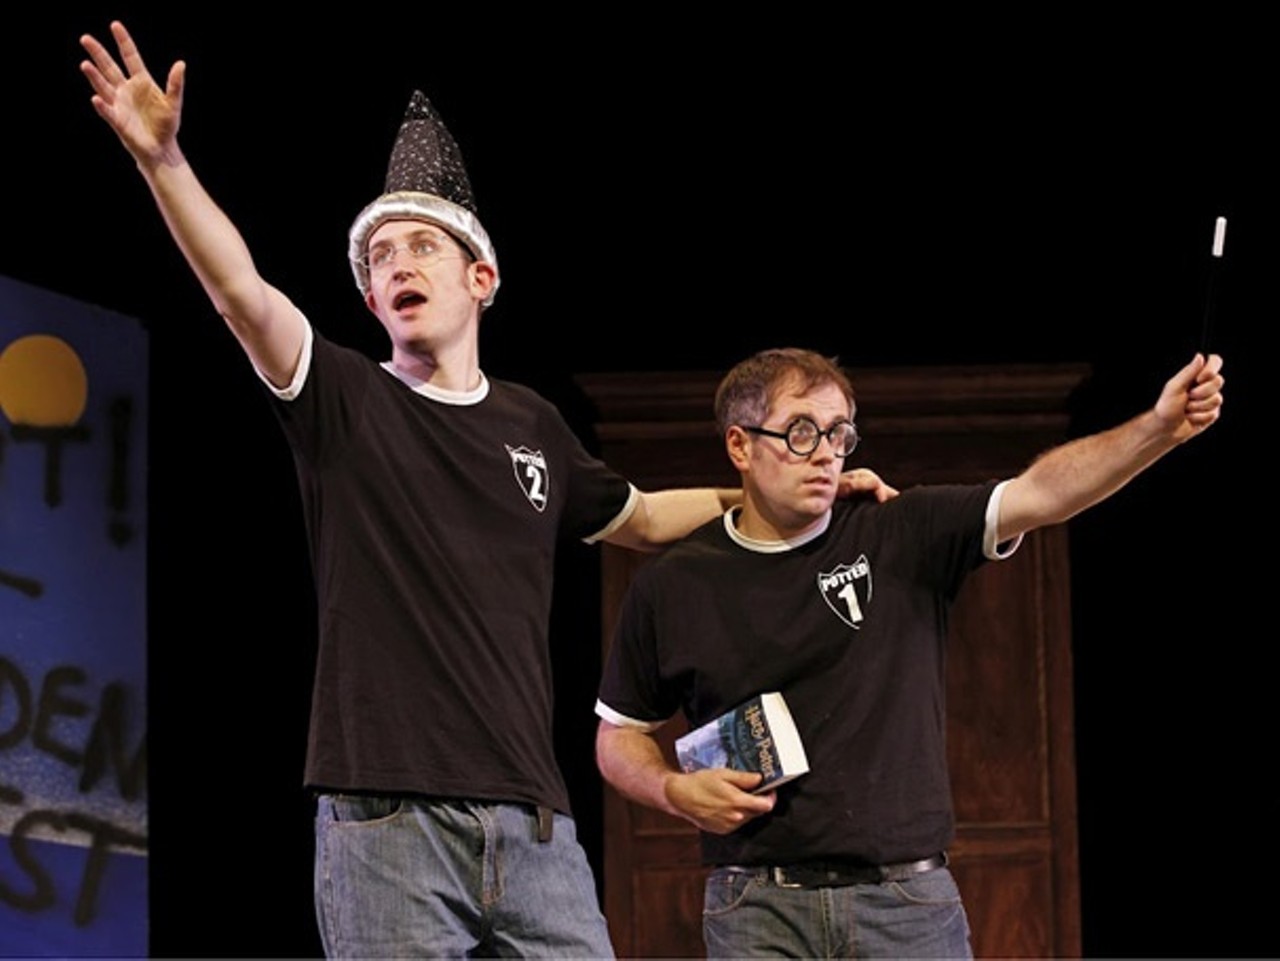 The Harry Potter series might be over but the fantasy novels that launched the seven-part movie series are still as popular as ever. To capitalize on that popularity, former BBC television hosts Daniel Clarkson and Jefferson Turner have put together Potted Potter: The Unauthorized Harry Experience — A Parody by Dan and Jeff, a show that squeezes the tomes into a 70-minute performance complete with costume changes and props. Clarkson and Turner will also encourage the audience to participate in a real-life game of Quidditch. The show has been touring since 2012 and played to a full house when it came through town earlier this year. It's back in Cleveland tonight at 7:30 at the Ohio Theatre to kick off a three-night stand. Tickets are $10 to $45. (Niesel)